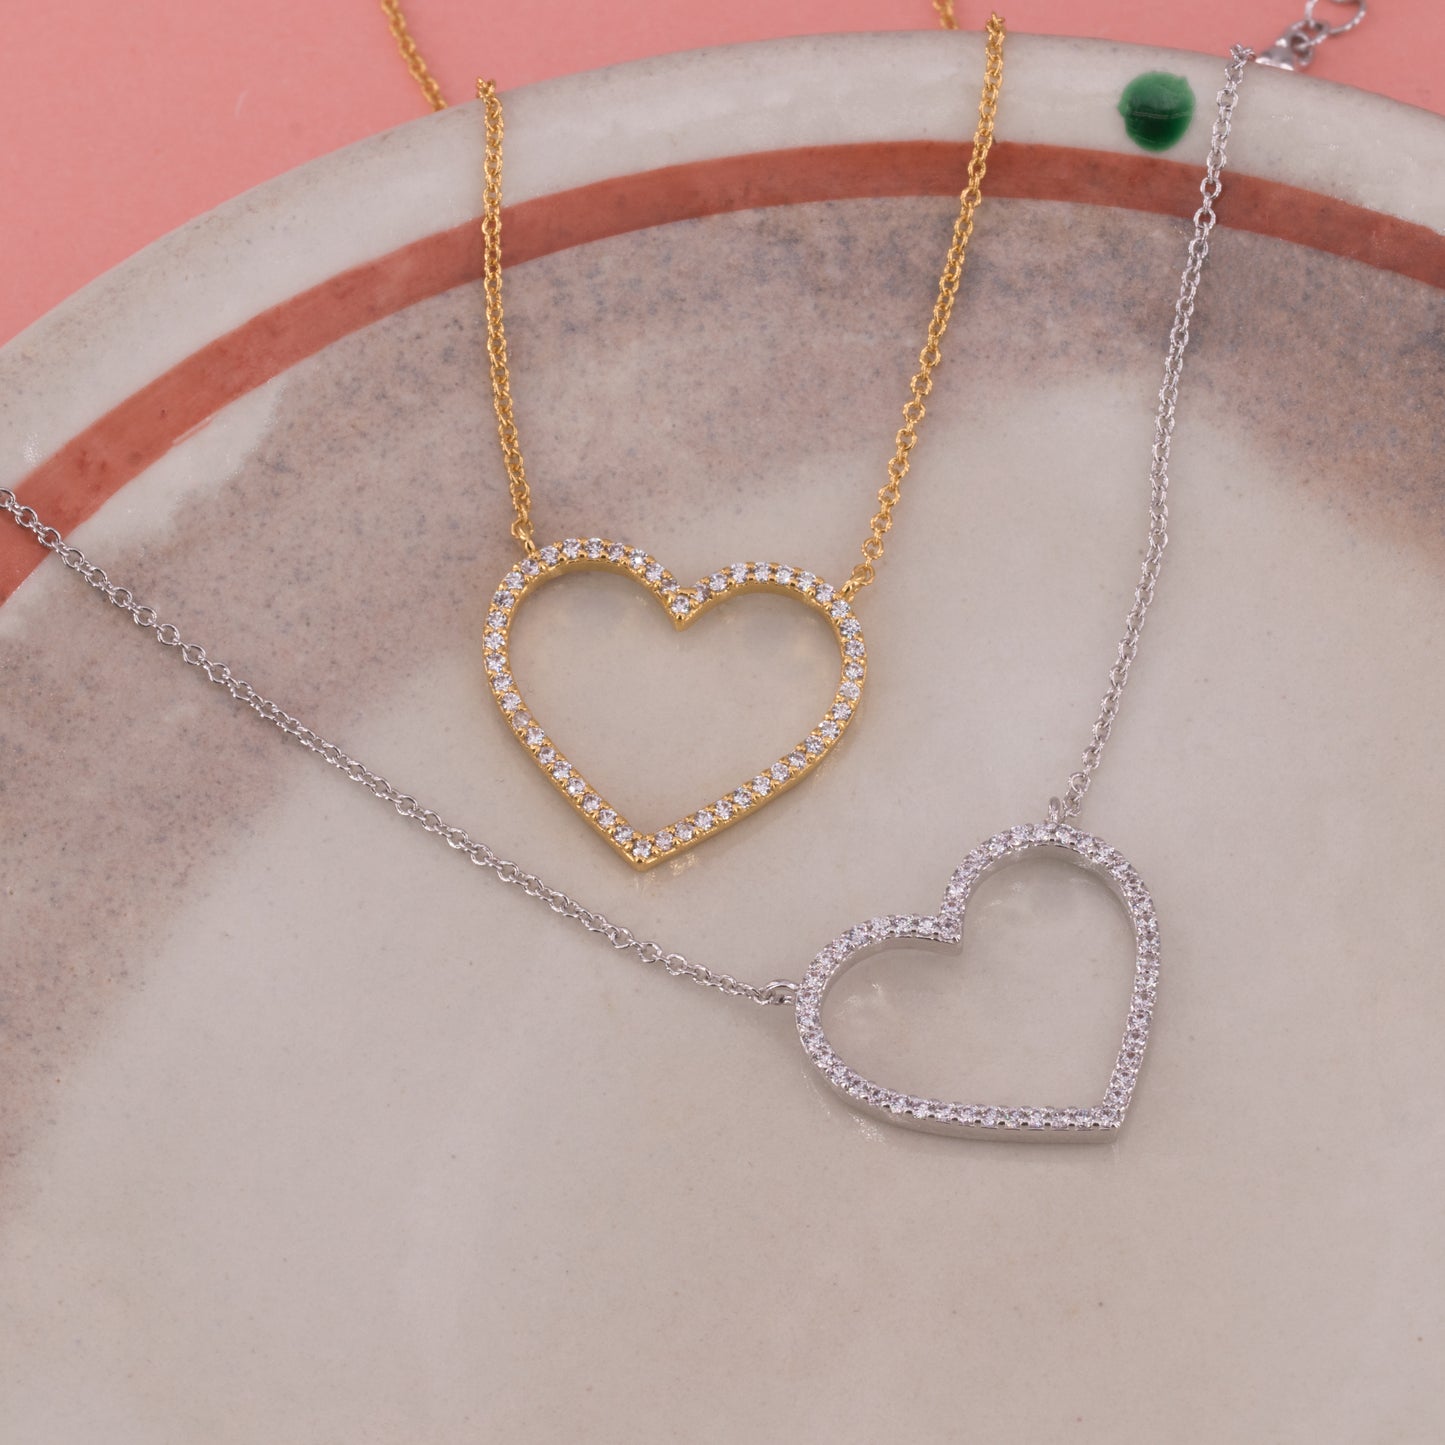 Open Your Heart Necklace